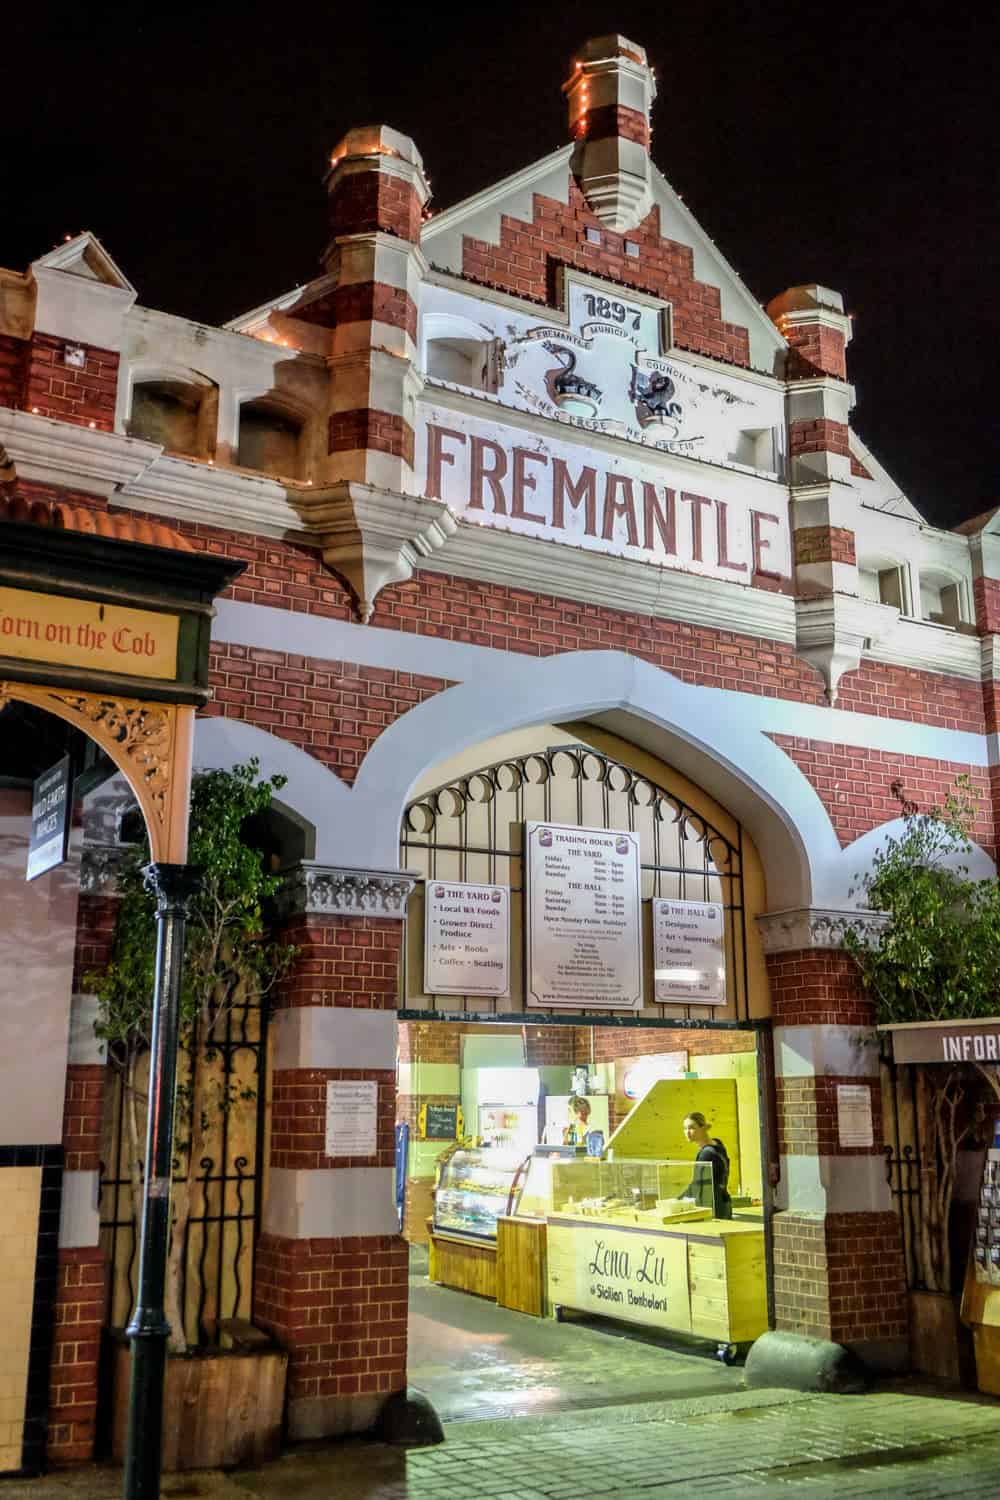 The 1897 red-brick Victorian-era heritage building of Fremantle Market in Perth